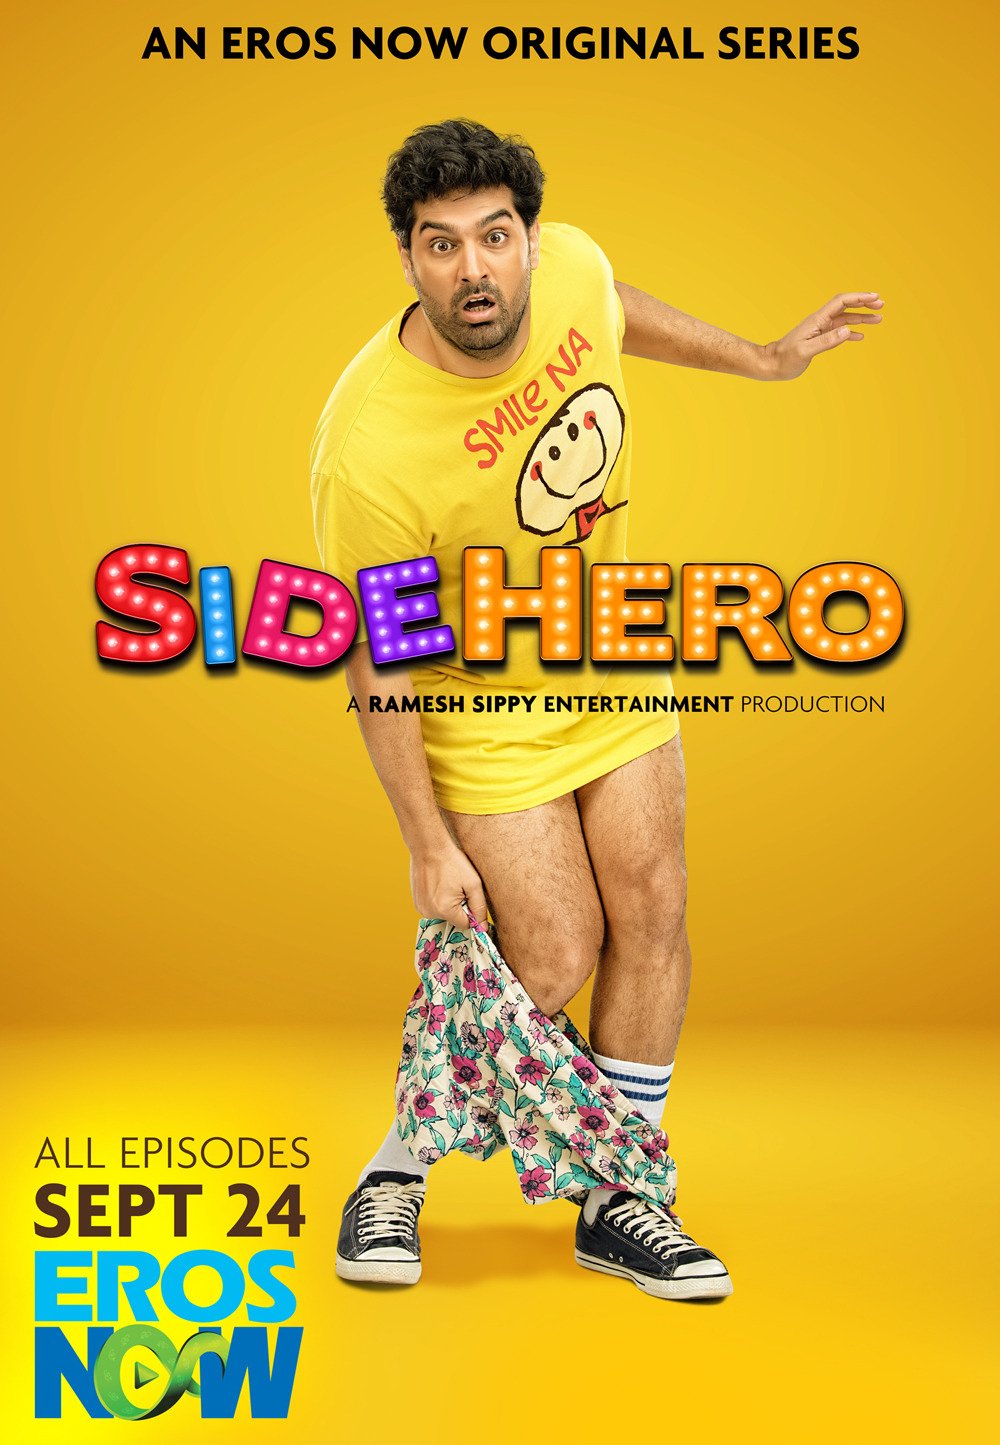 Extra Large TV Poster Image for SideHero (#11 of 17)